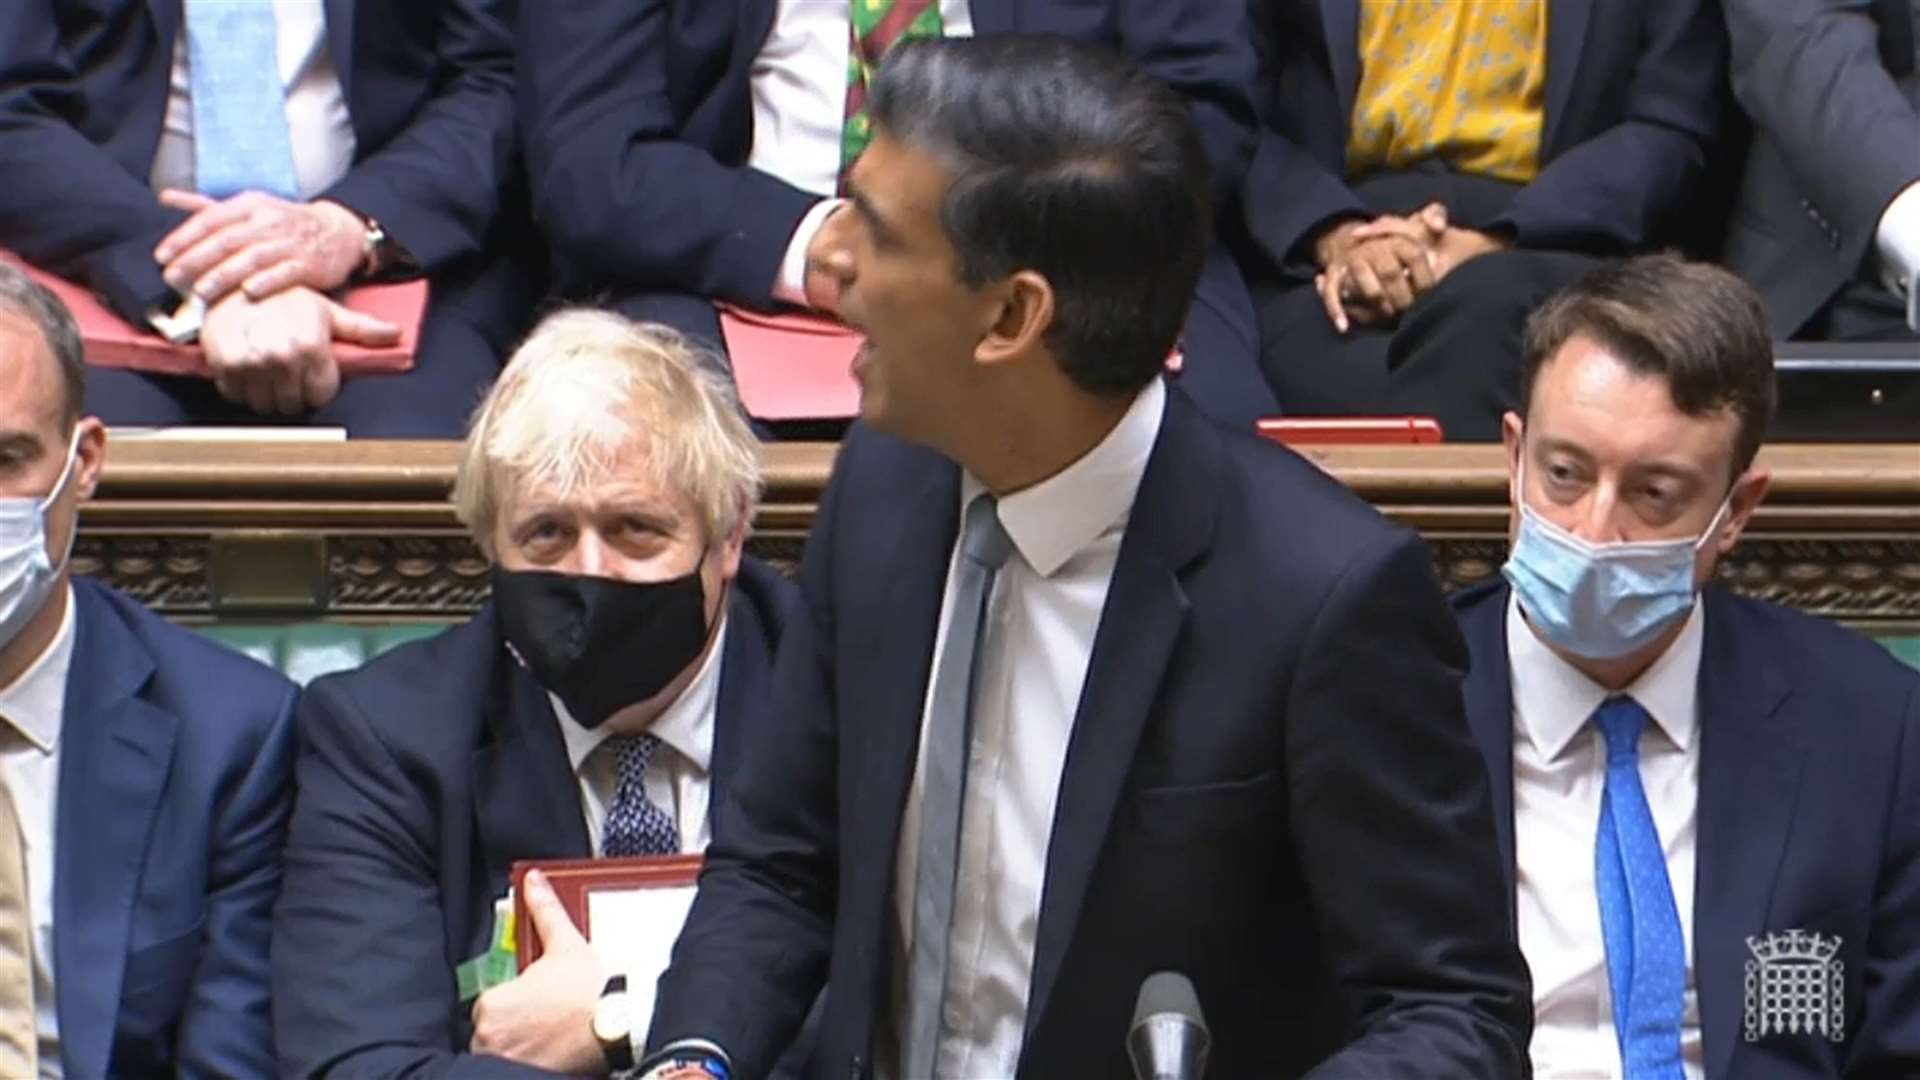 Prime Minister Boris Johnson was among the Government ministers wearing a face mask for the Budget (PA Wire)